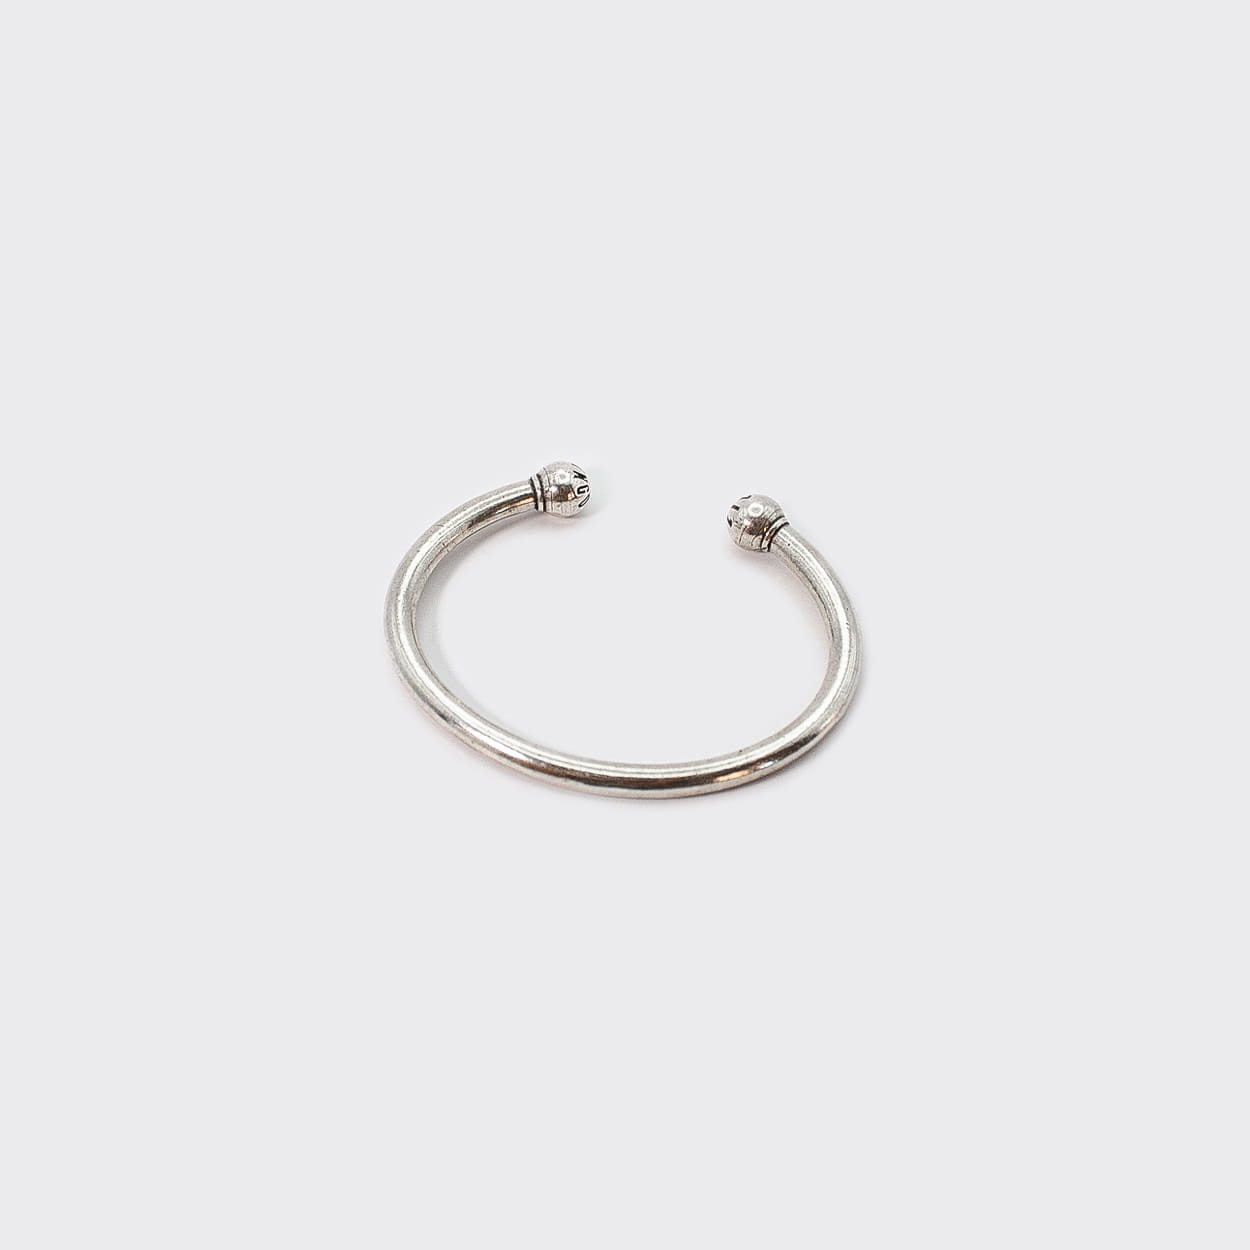 Atelier Domingo's bangle is made of a high-quality 925 Sterling silver plating (10 microns). It is adjustable to any wrist. It is made in Spain and for both men and women.